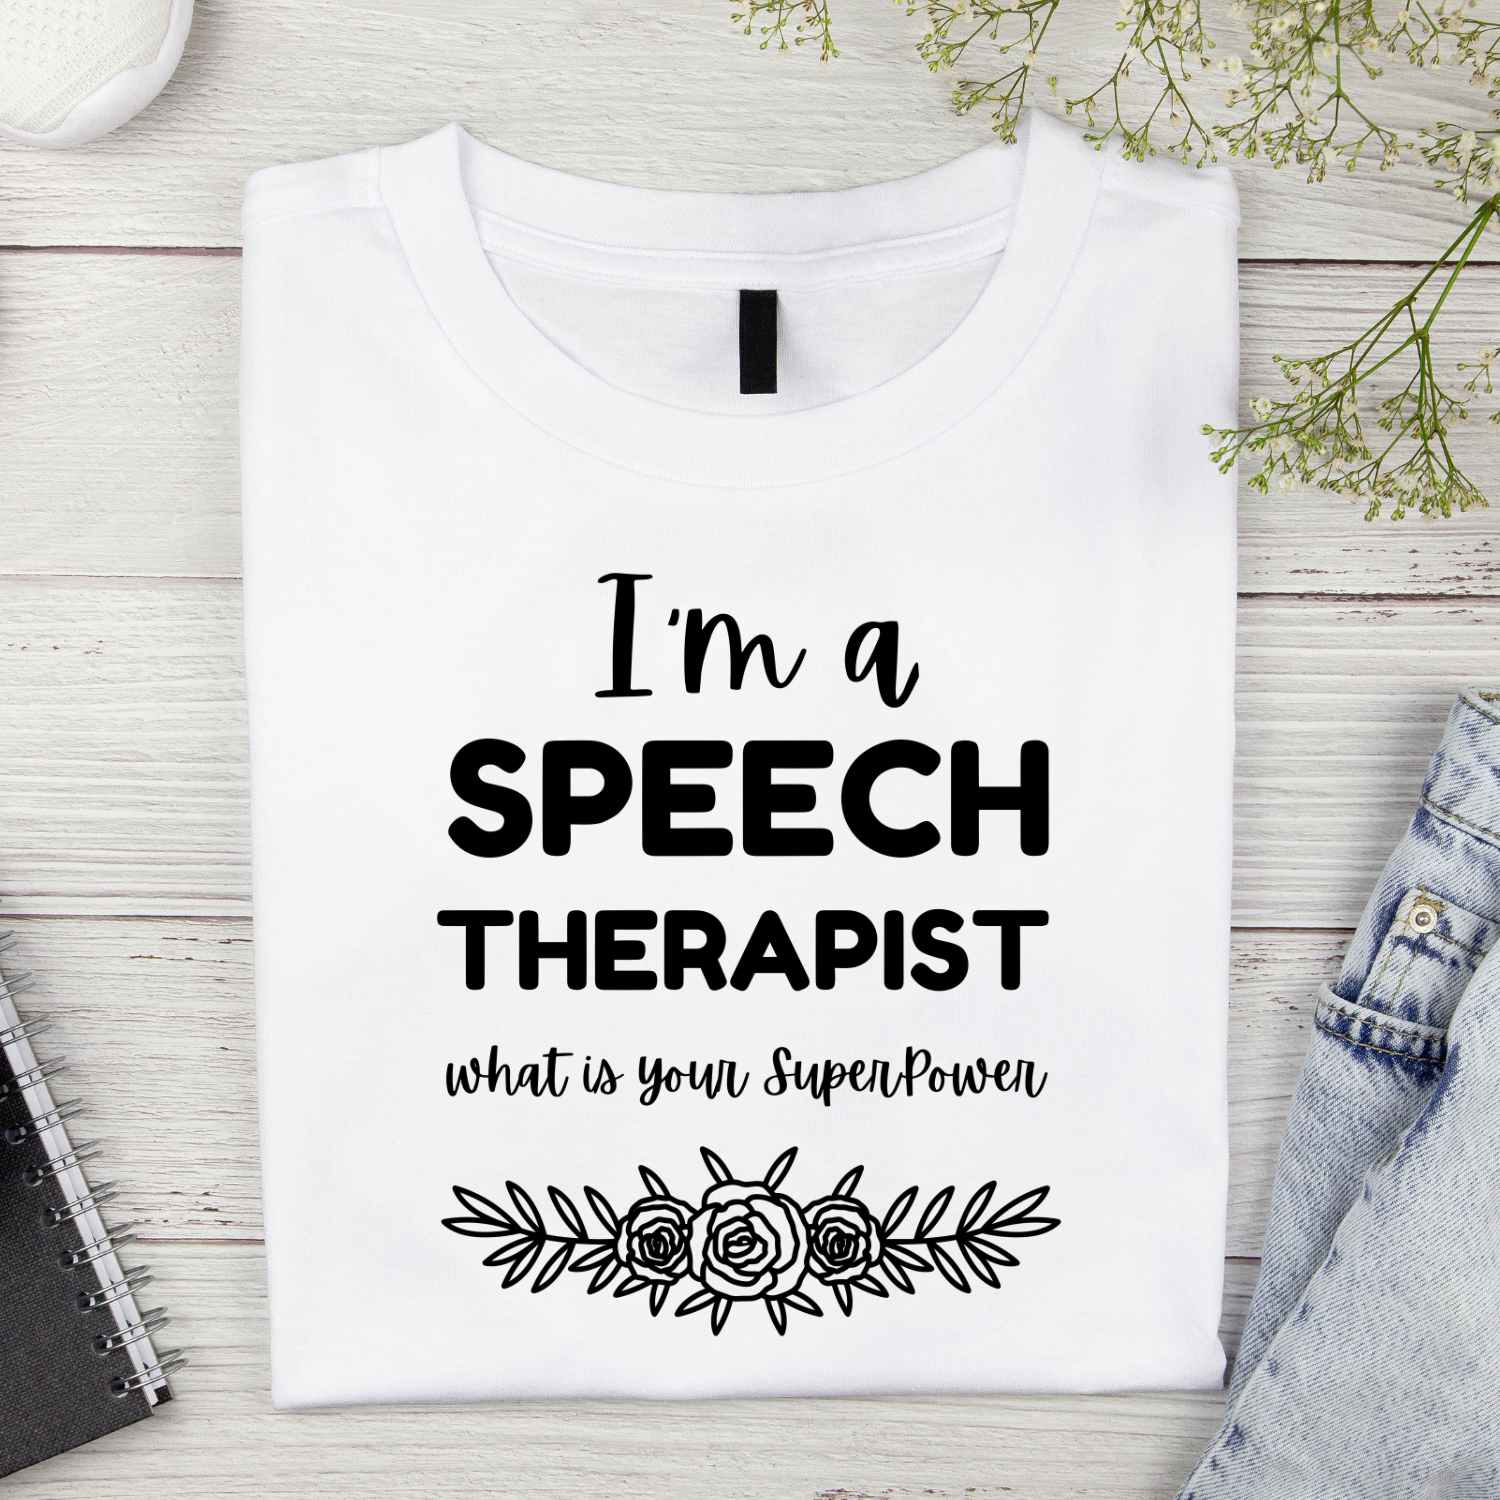 I am a Speech Therapist what is your Superpower T-shirt Design